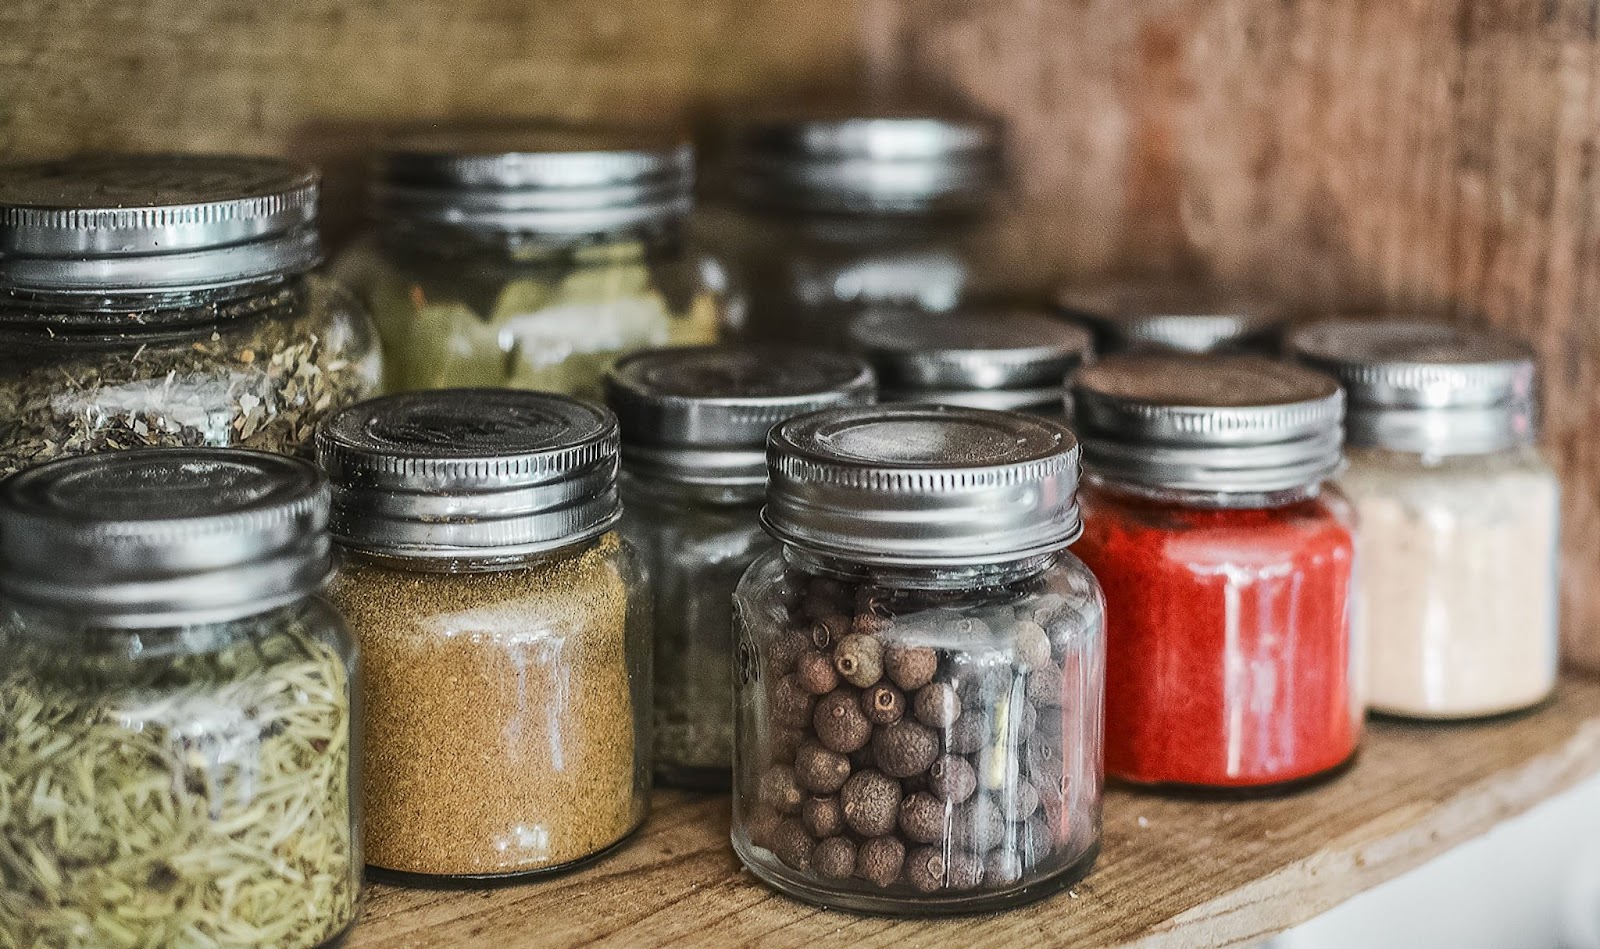 9 Ways to Preserve Food That Don't Require Electricity